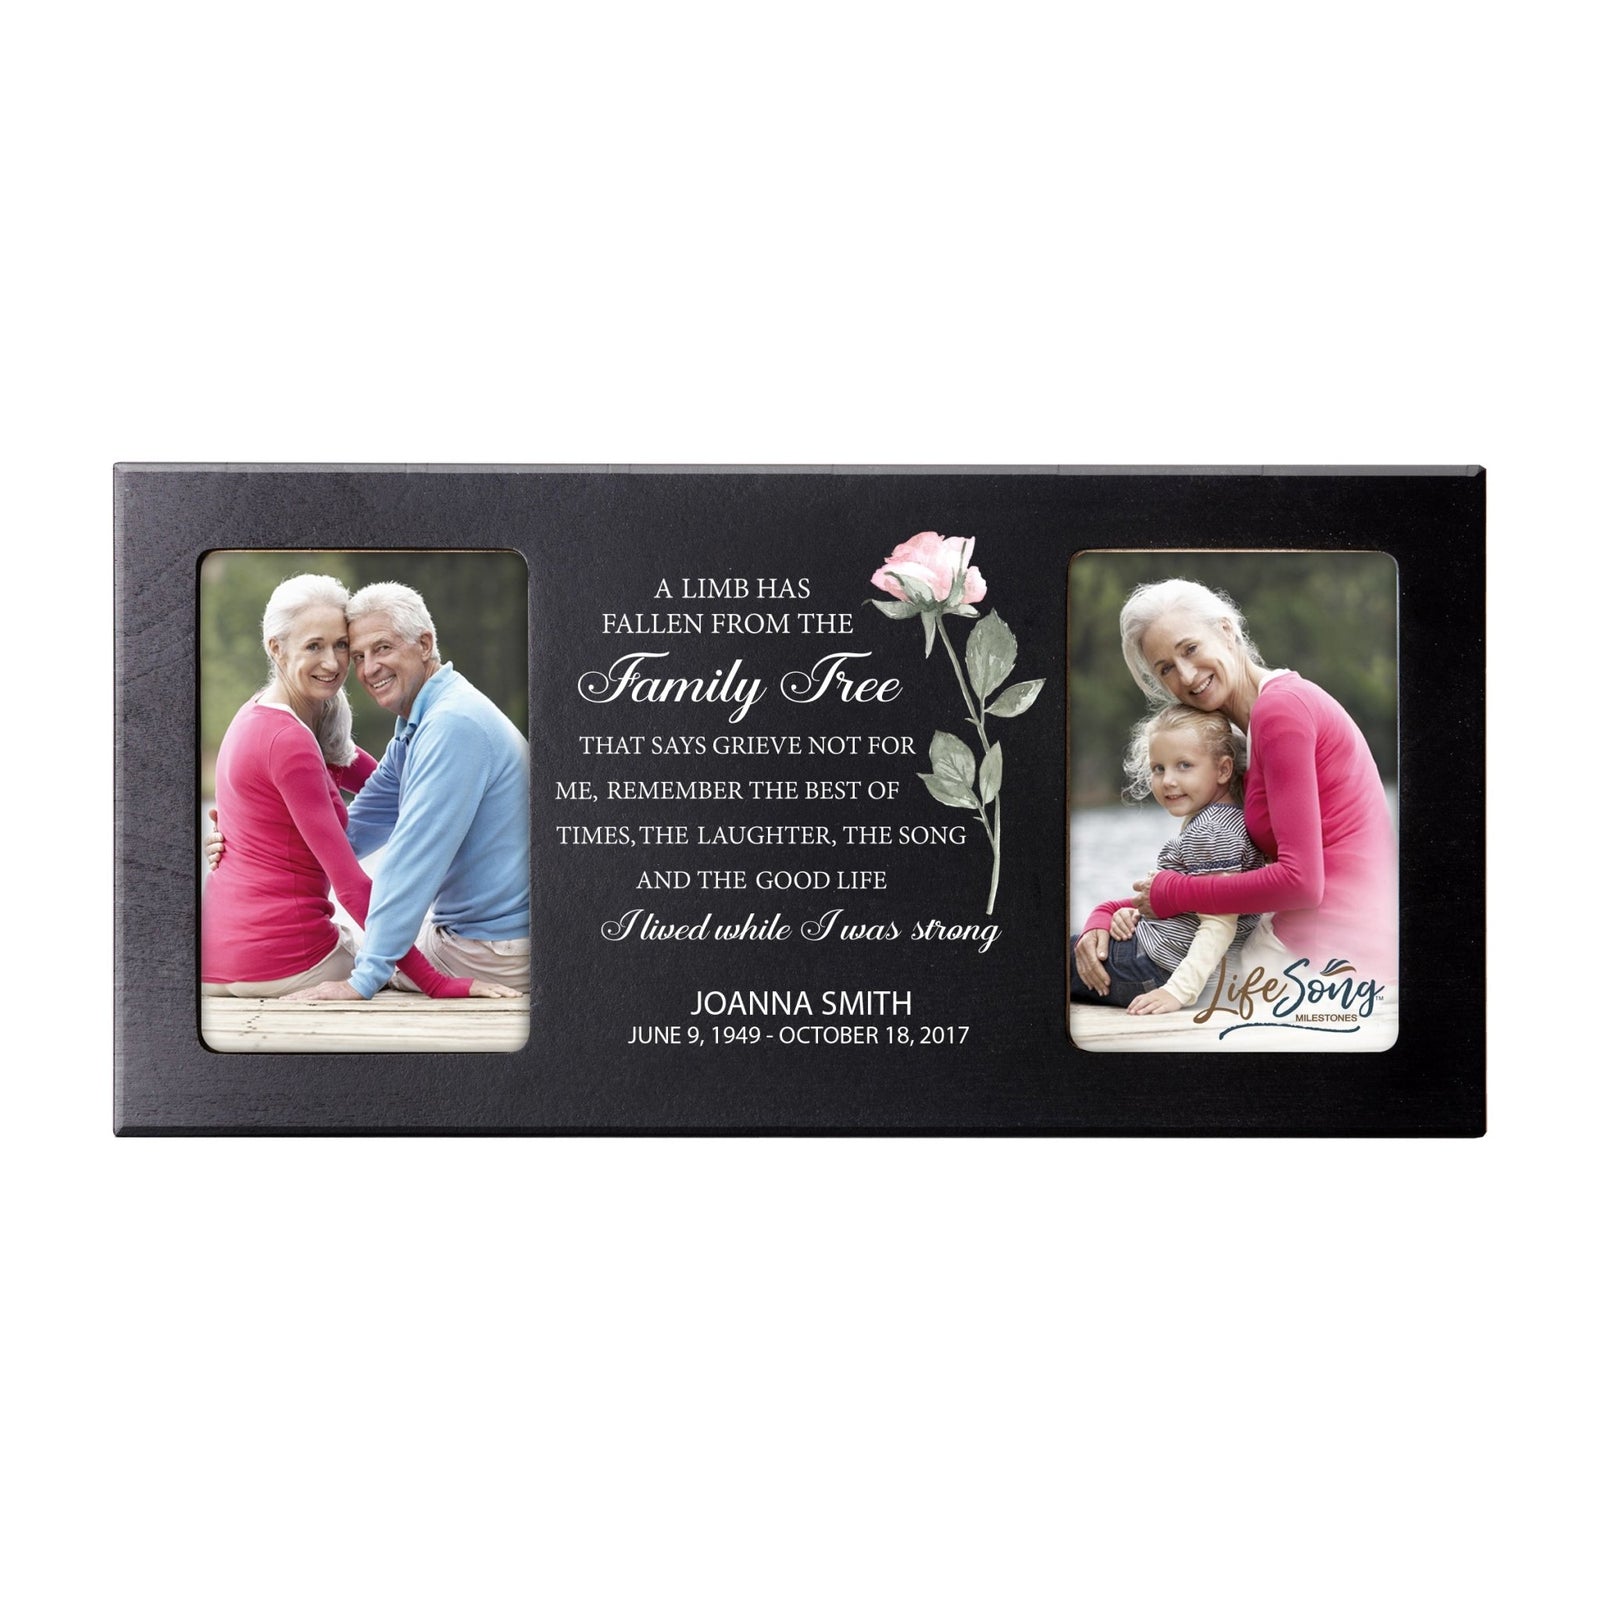 Custom Memorial Picture Frame 16x8in Holds Two 4x6in Photos - The Good Life I Lived - LifeSong Milestones